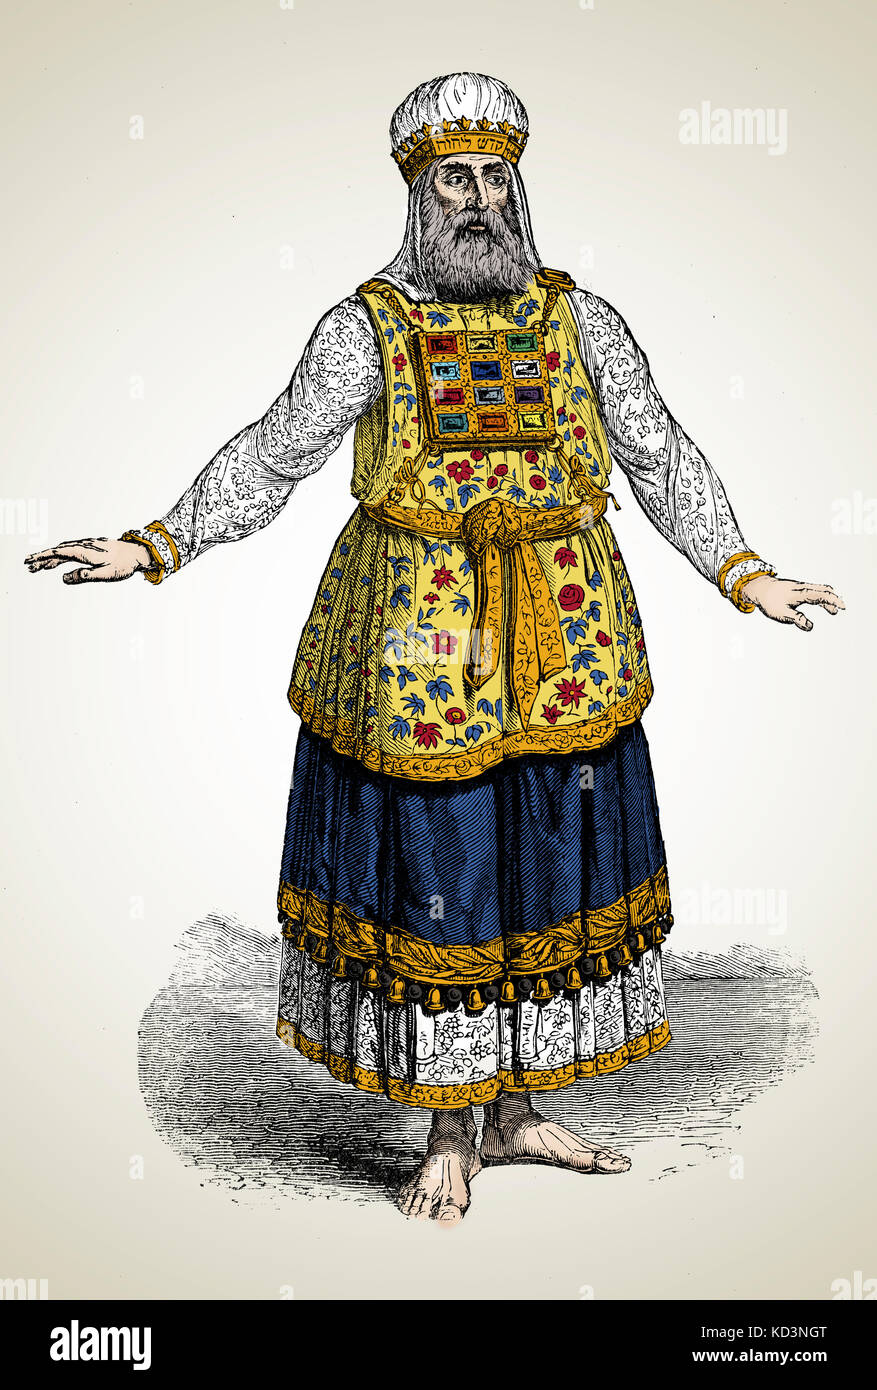 Costume of an Aaronite High priest of Israel 19th century engraving. Stock Photo